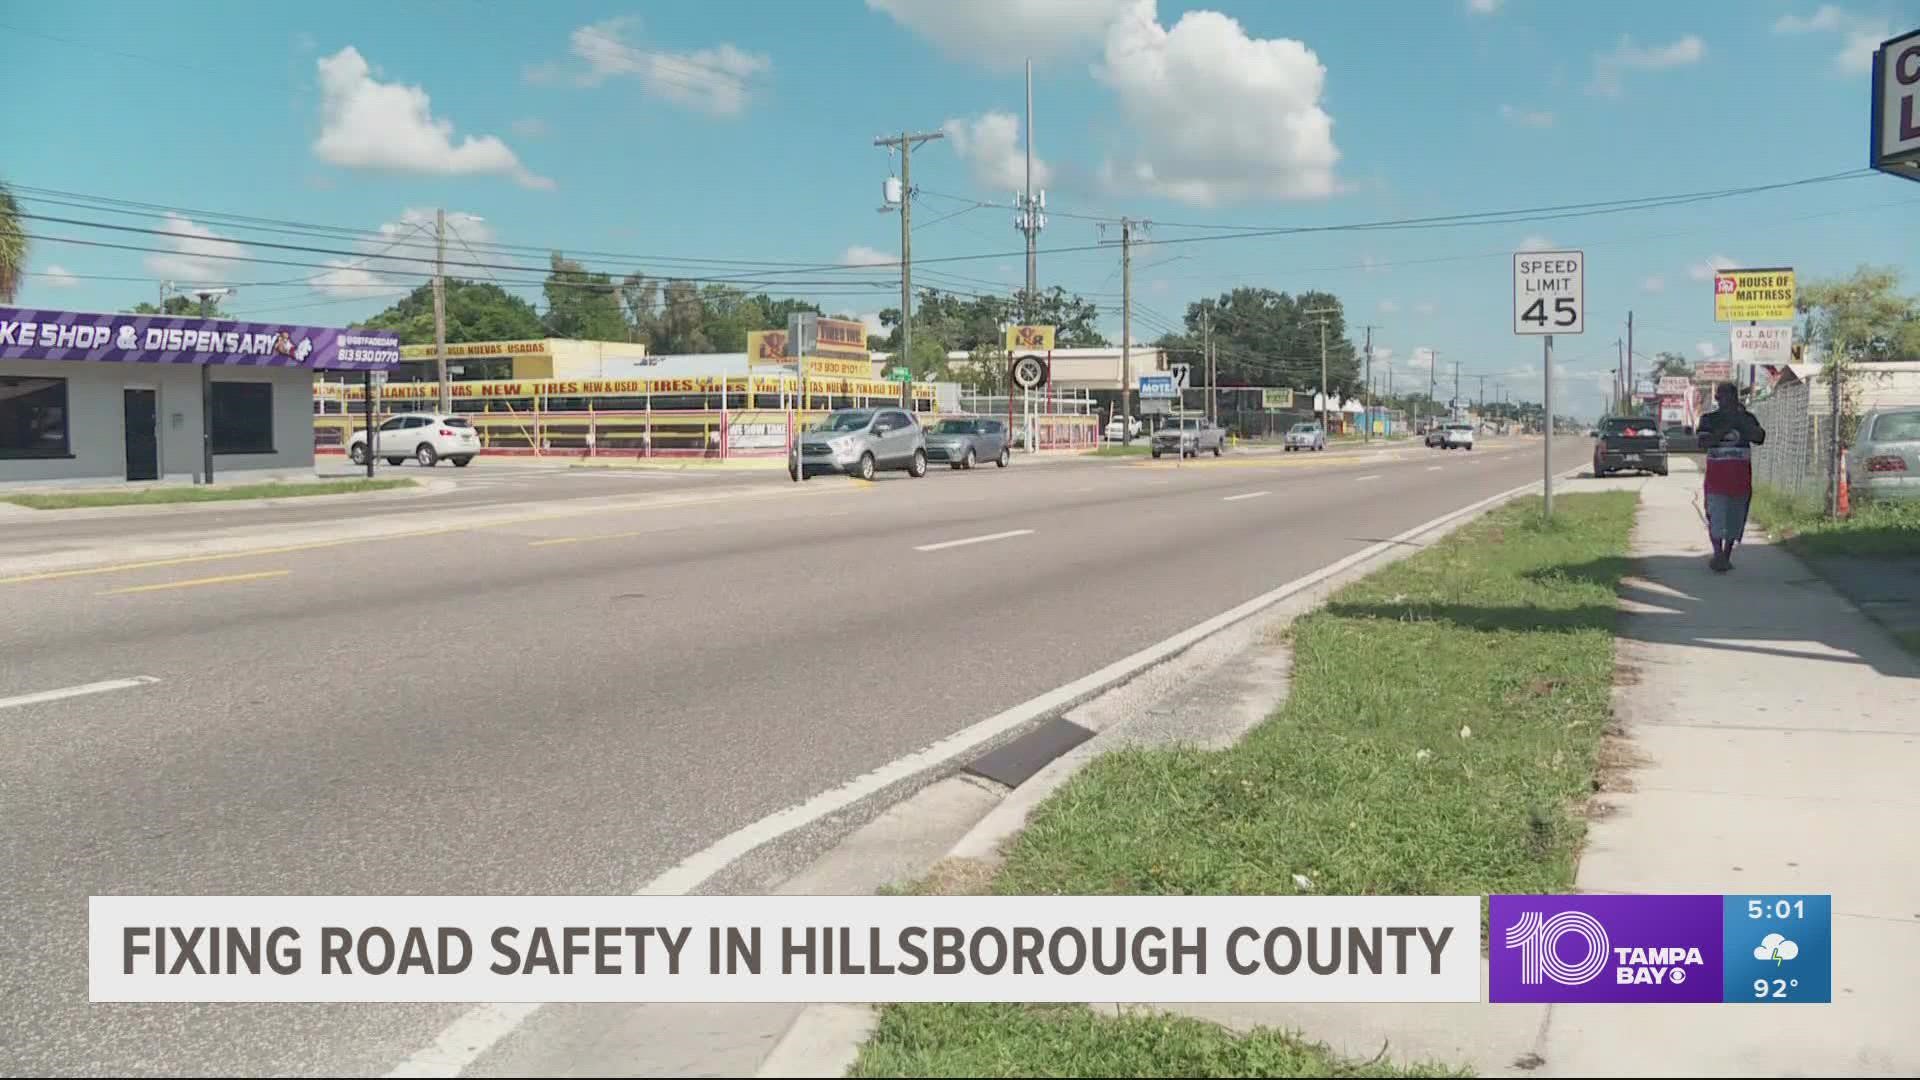 FDOT says there is already a plan underway to improve pedestrian safety along Nebraska Avenue.